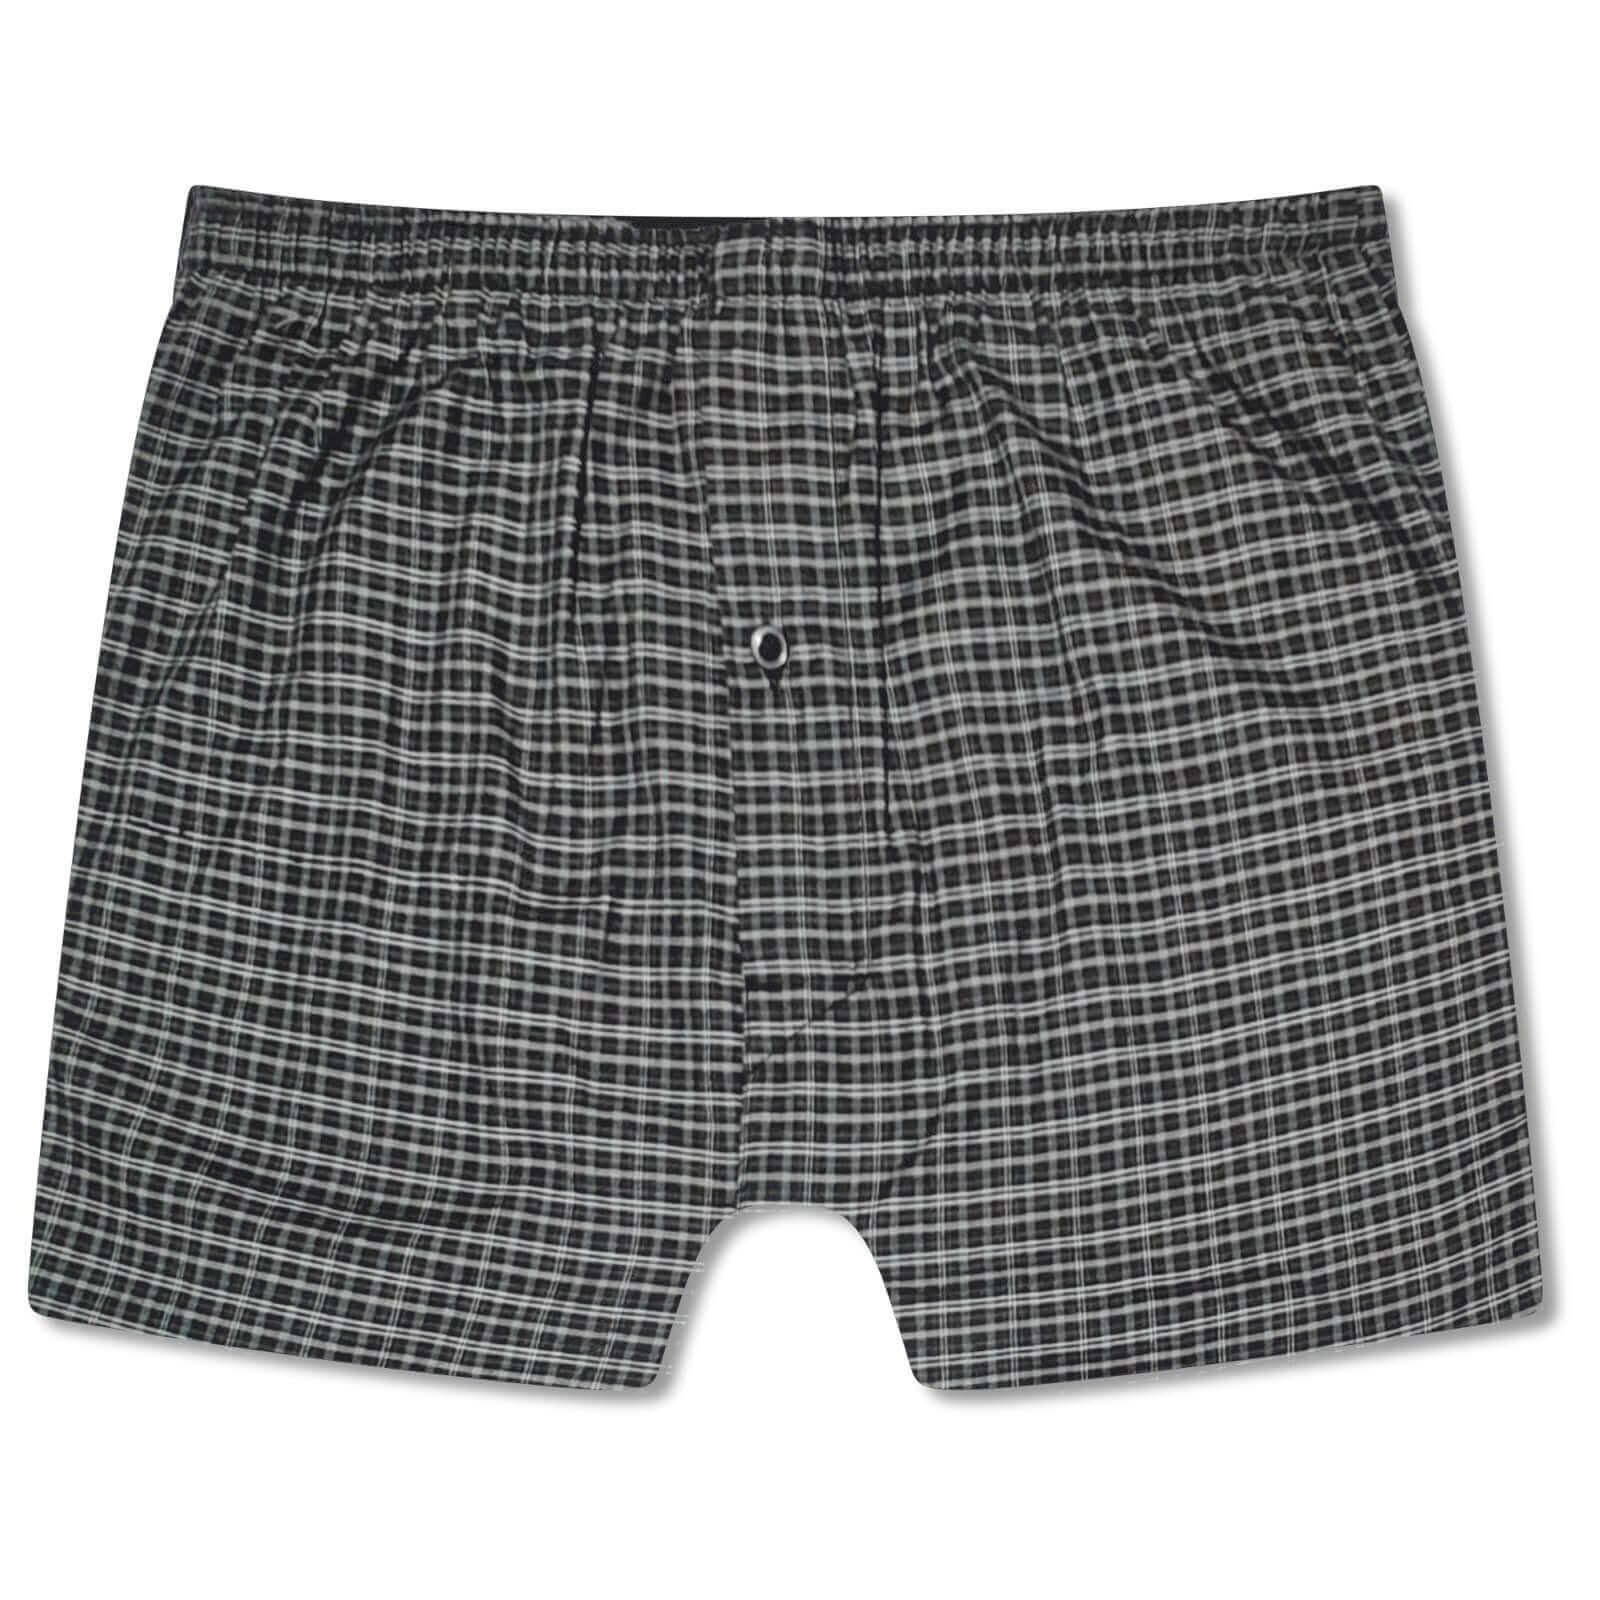 Pack Of 6 Kids Woven Boxers, Loose Fit Boxershorts, Comfort Waistband Underwear (KB01). Buy now for £8.00. A Boxer Shorts by Sock Stack. black, blue, boxer shorts, boys, check, childrens, classic boxers, comfortable, cotton, cotton blend, elastic, grey, k